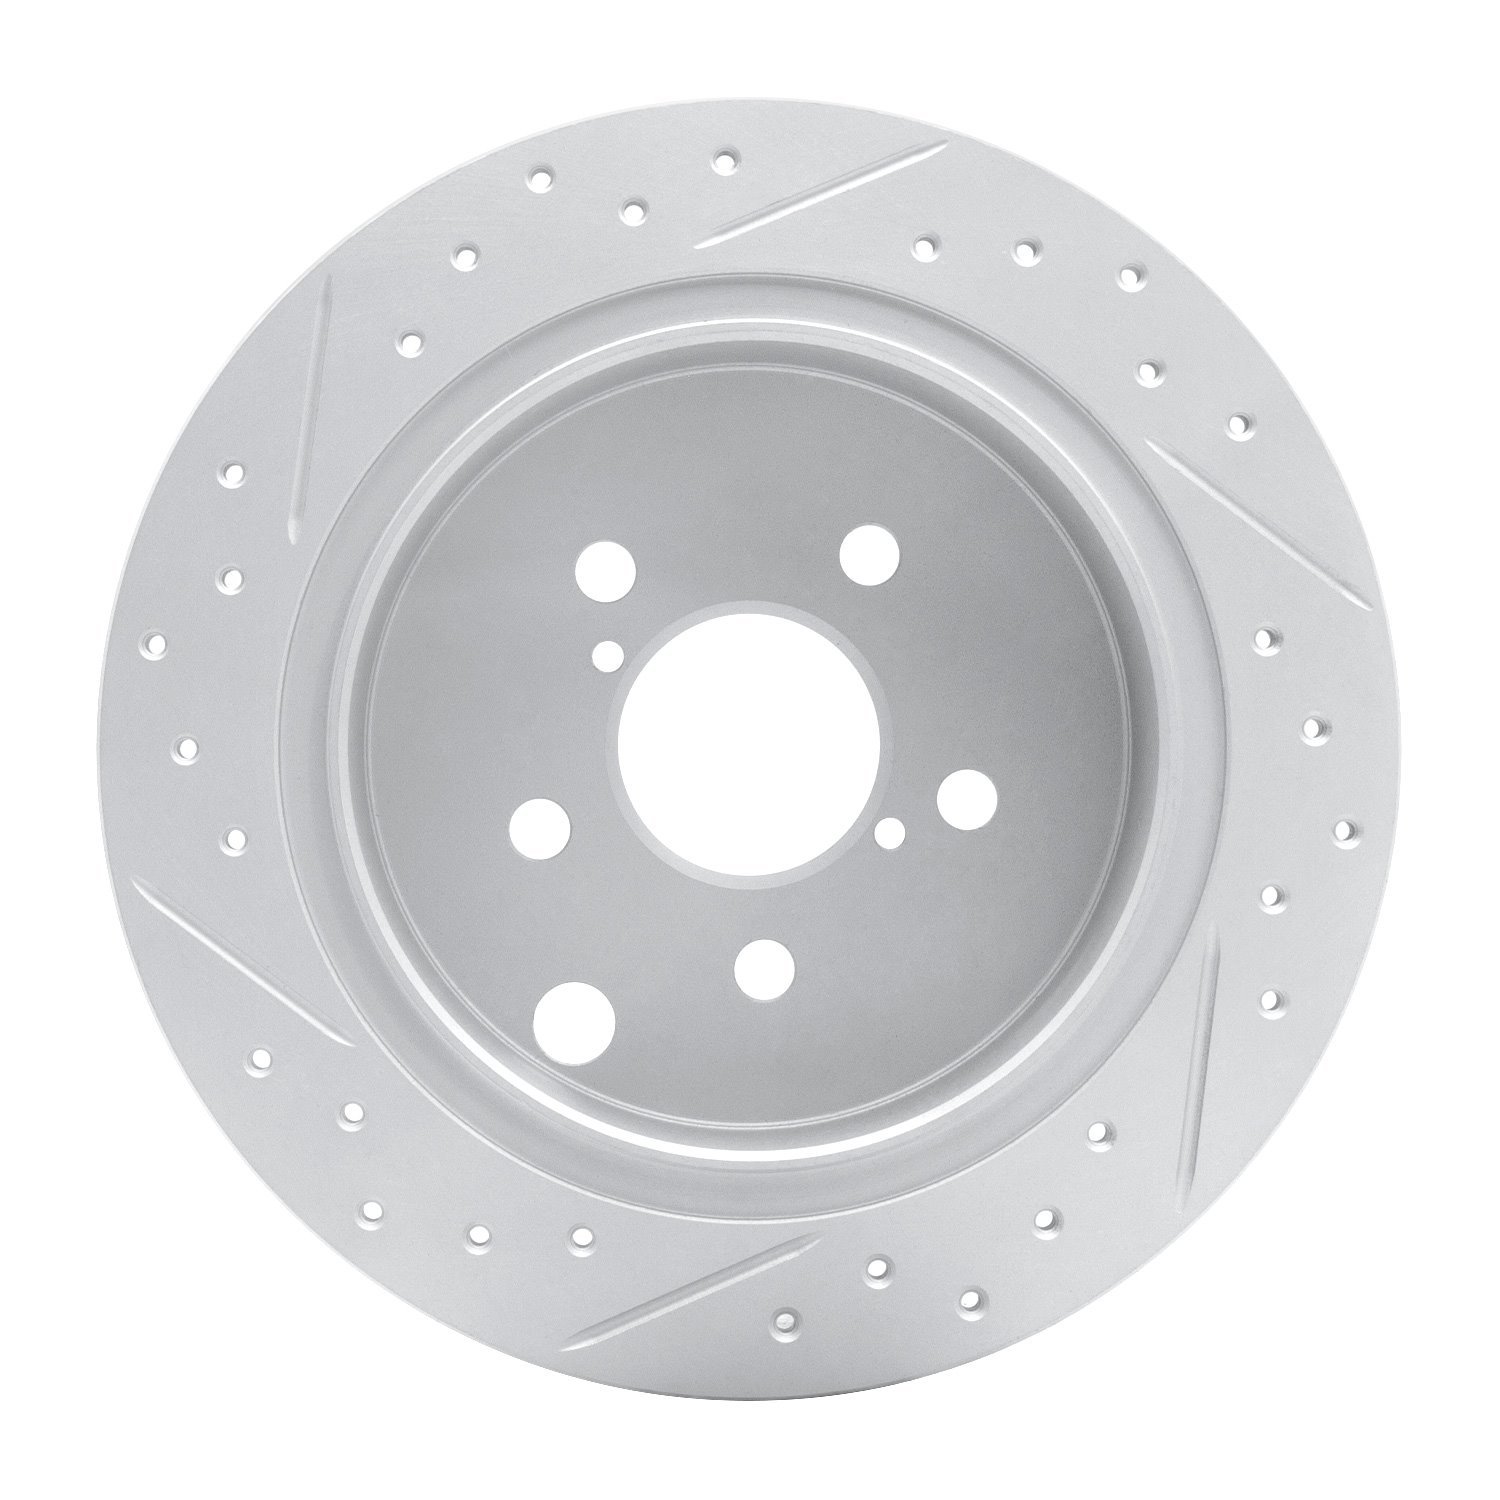 830-13025R Geoperformance Drilled/Slotted Brake Rotor, Fits Select Subaru, Position: Rear Right